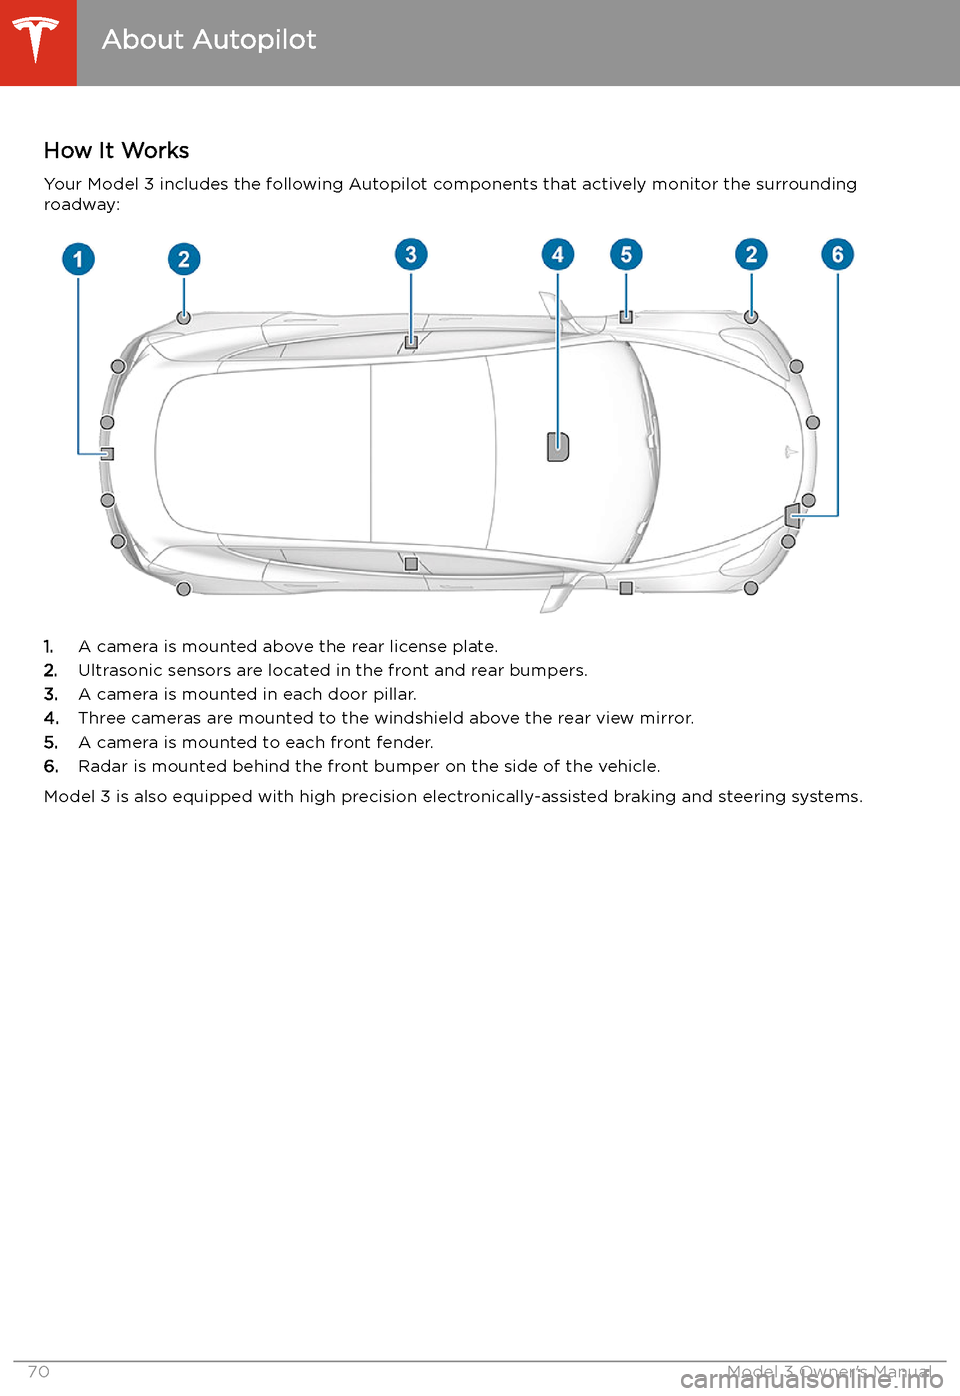 TESLA MODEL 3 2019  Owners Manual (Europe) Autopilot
About Autopilot
How It Works Your Model 3 includes the following Autopilot components that actively monitor the surrounding
roadway:
1. A camera is mounted above the rear license plate.
2. U